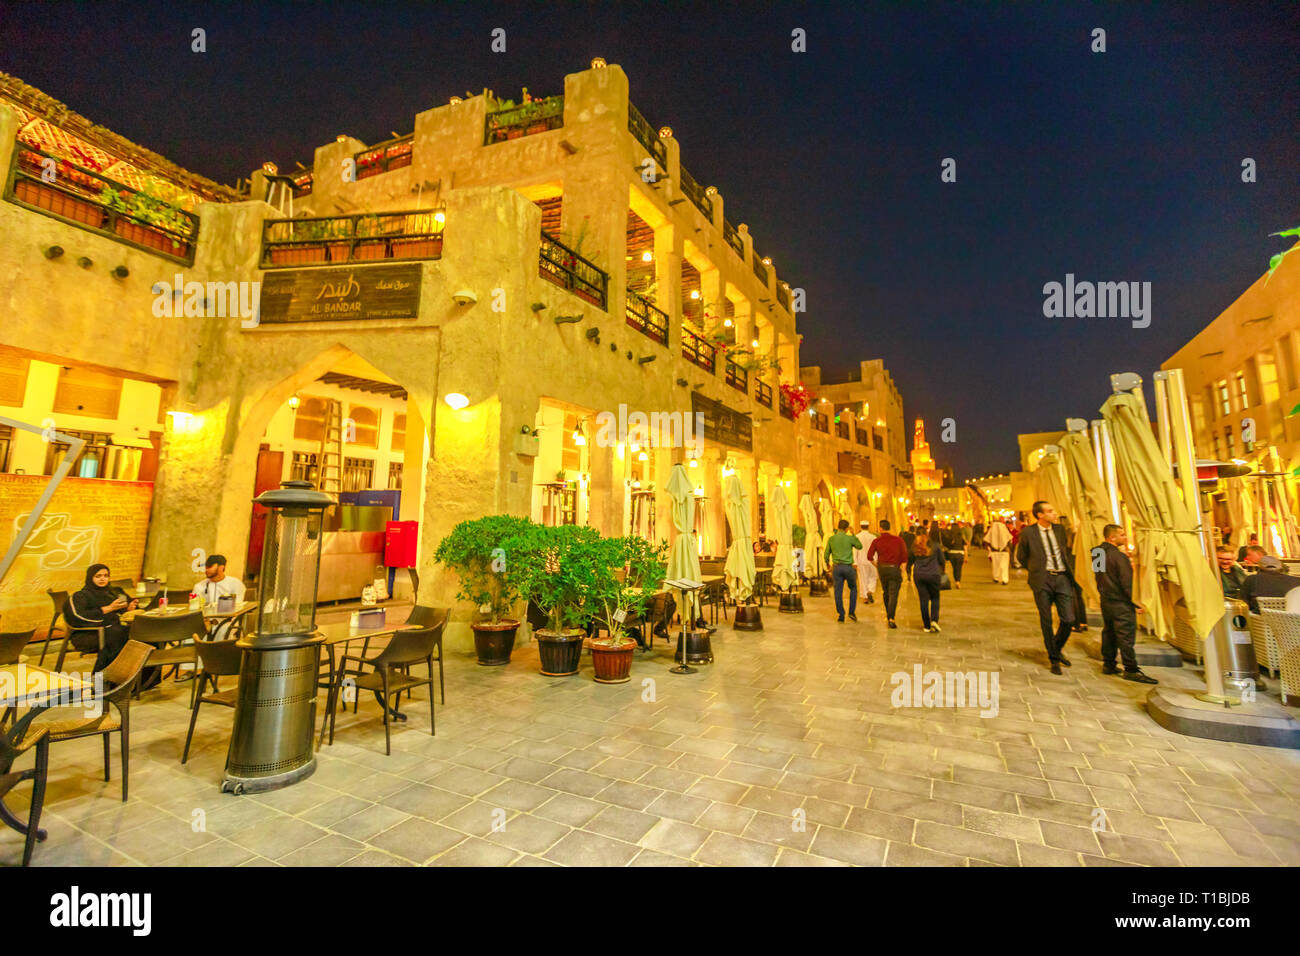 Doha, Qatar - February 17, 2019: Street view in Souq Waqif old traditional market with cafes and restaurants and the Fanar Islamic Cultural Center Stock Photo